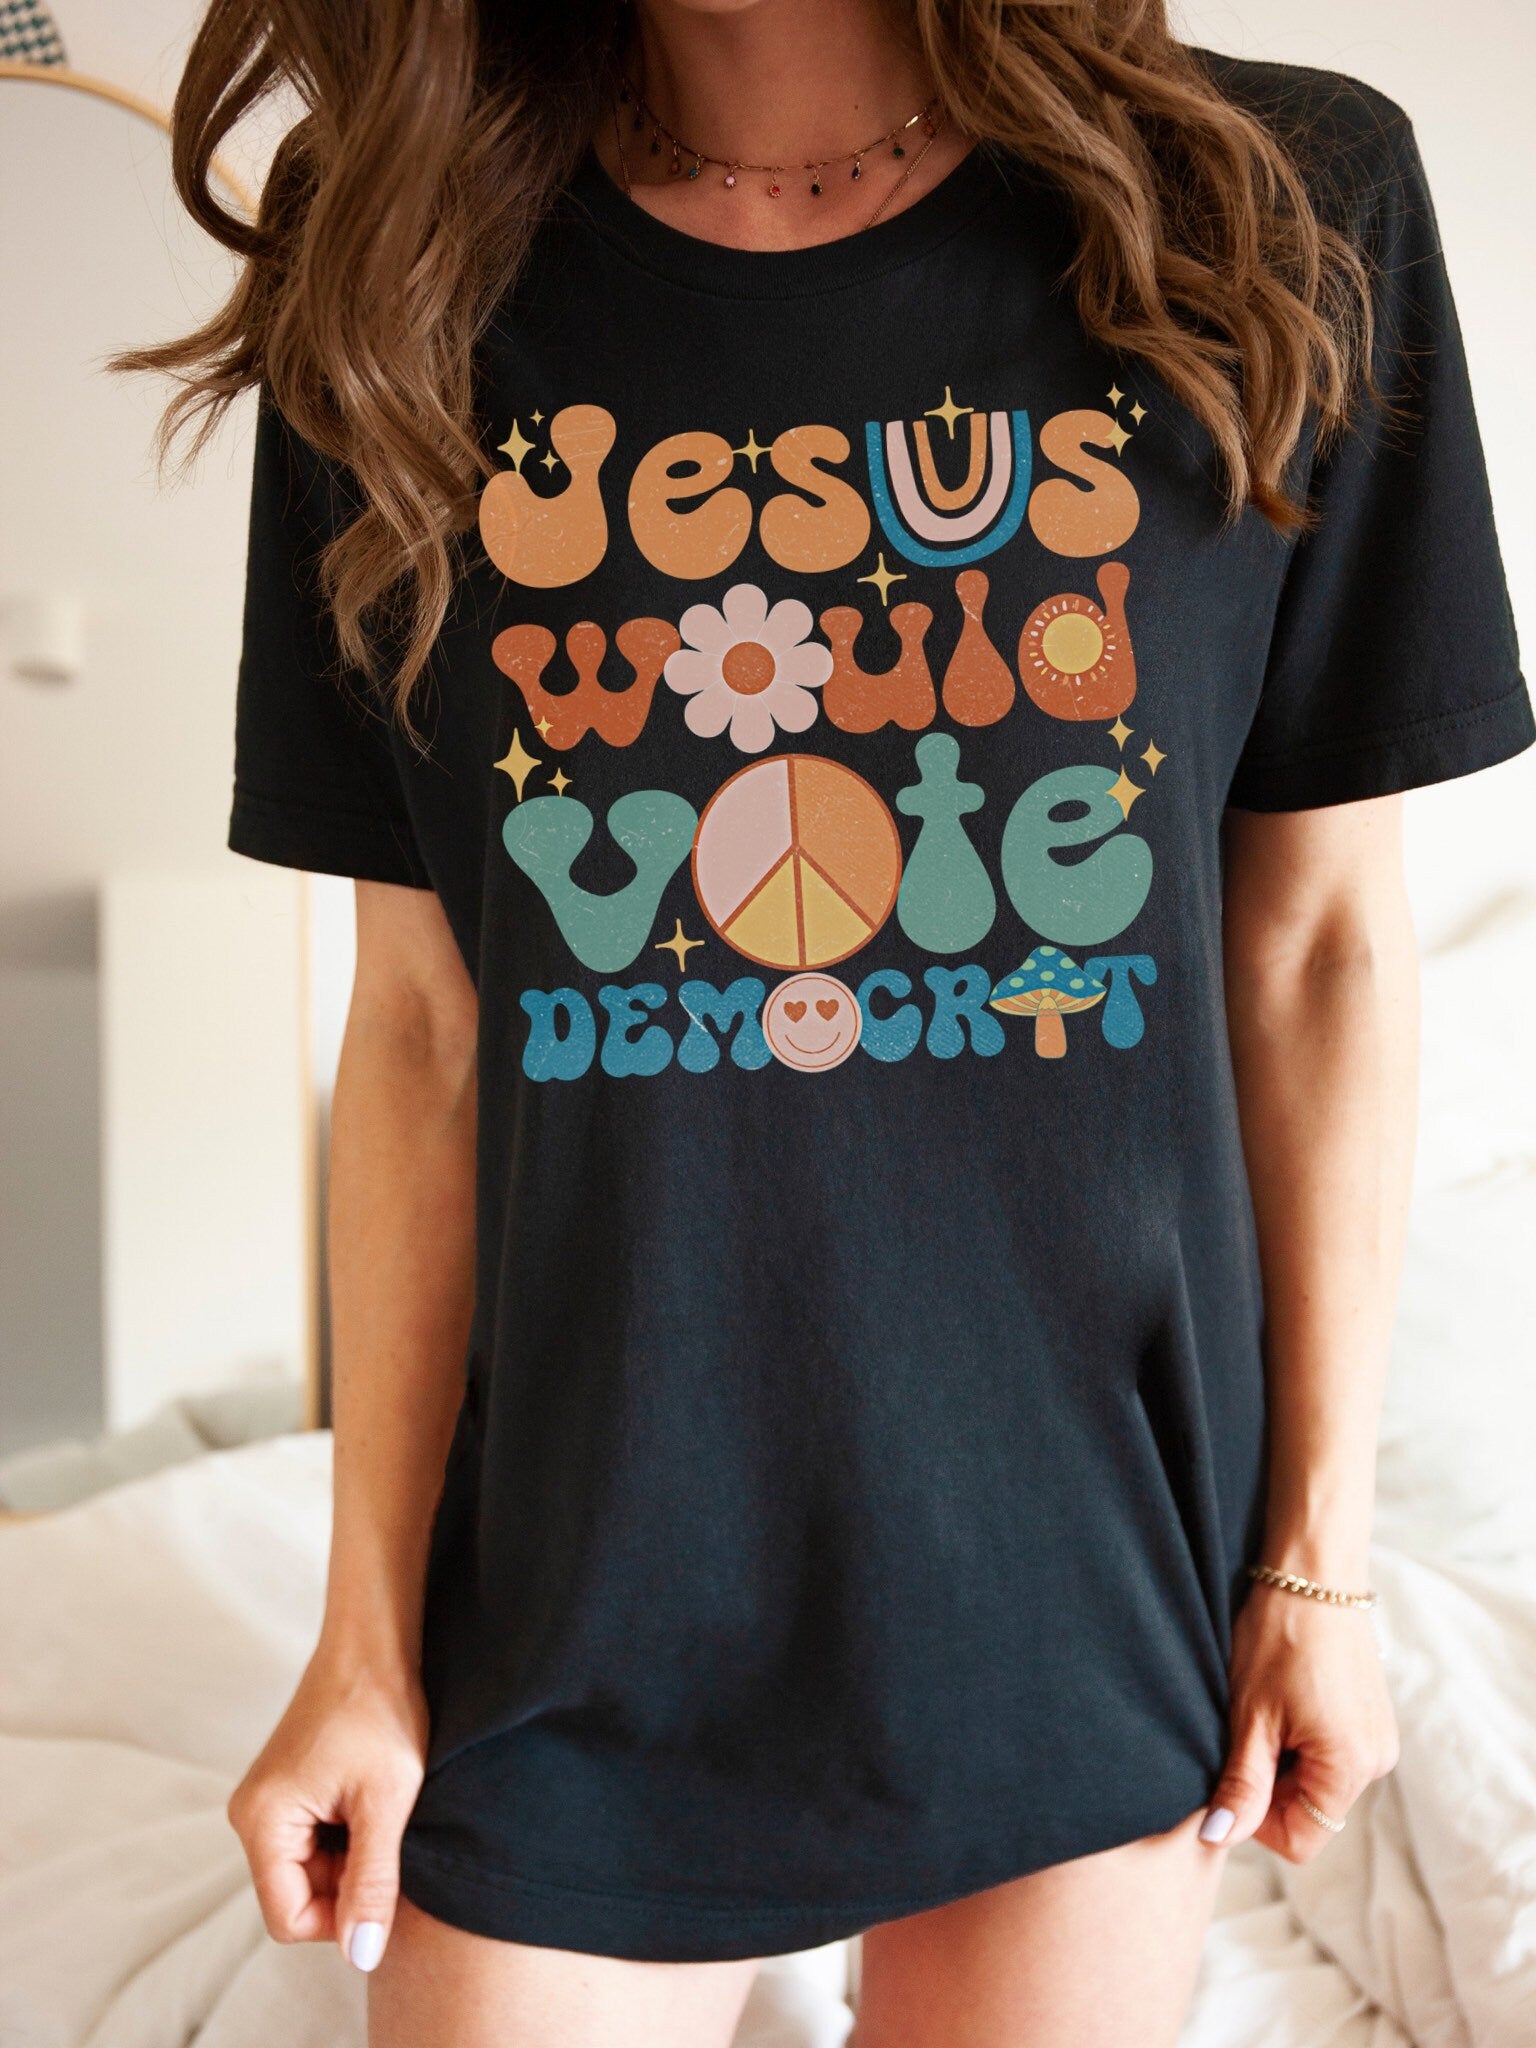 Jesus Would Vote Democrat Tshirt, Political Humor Tee, Liberal Shirts For Elections, Trendy Hippie Retro Style Shirts, Peace Sign Mushroom